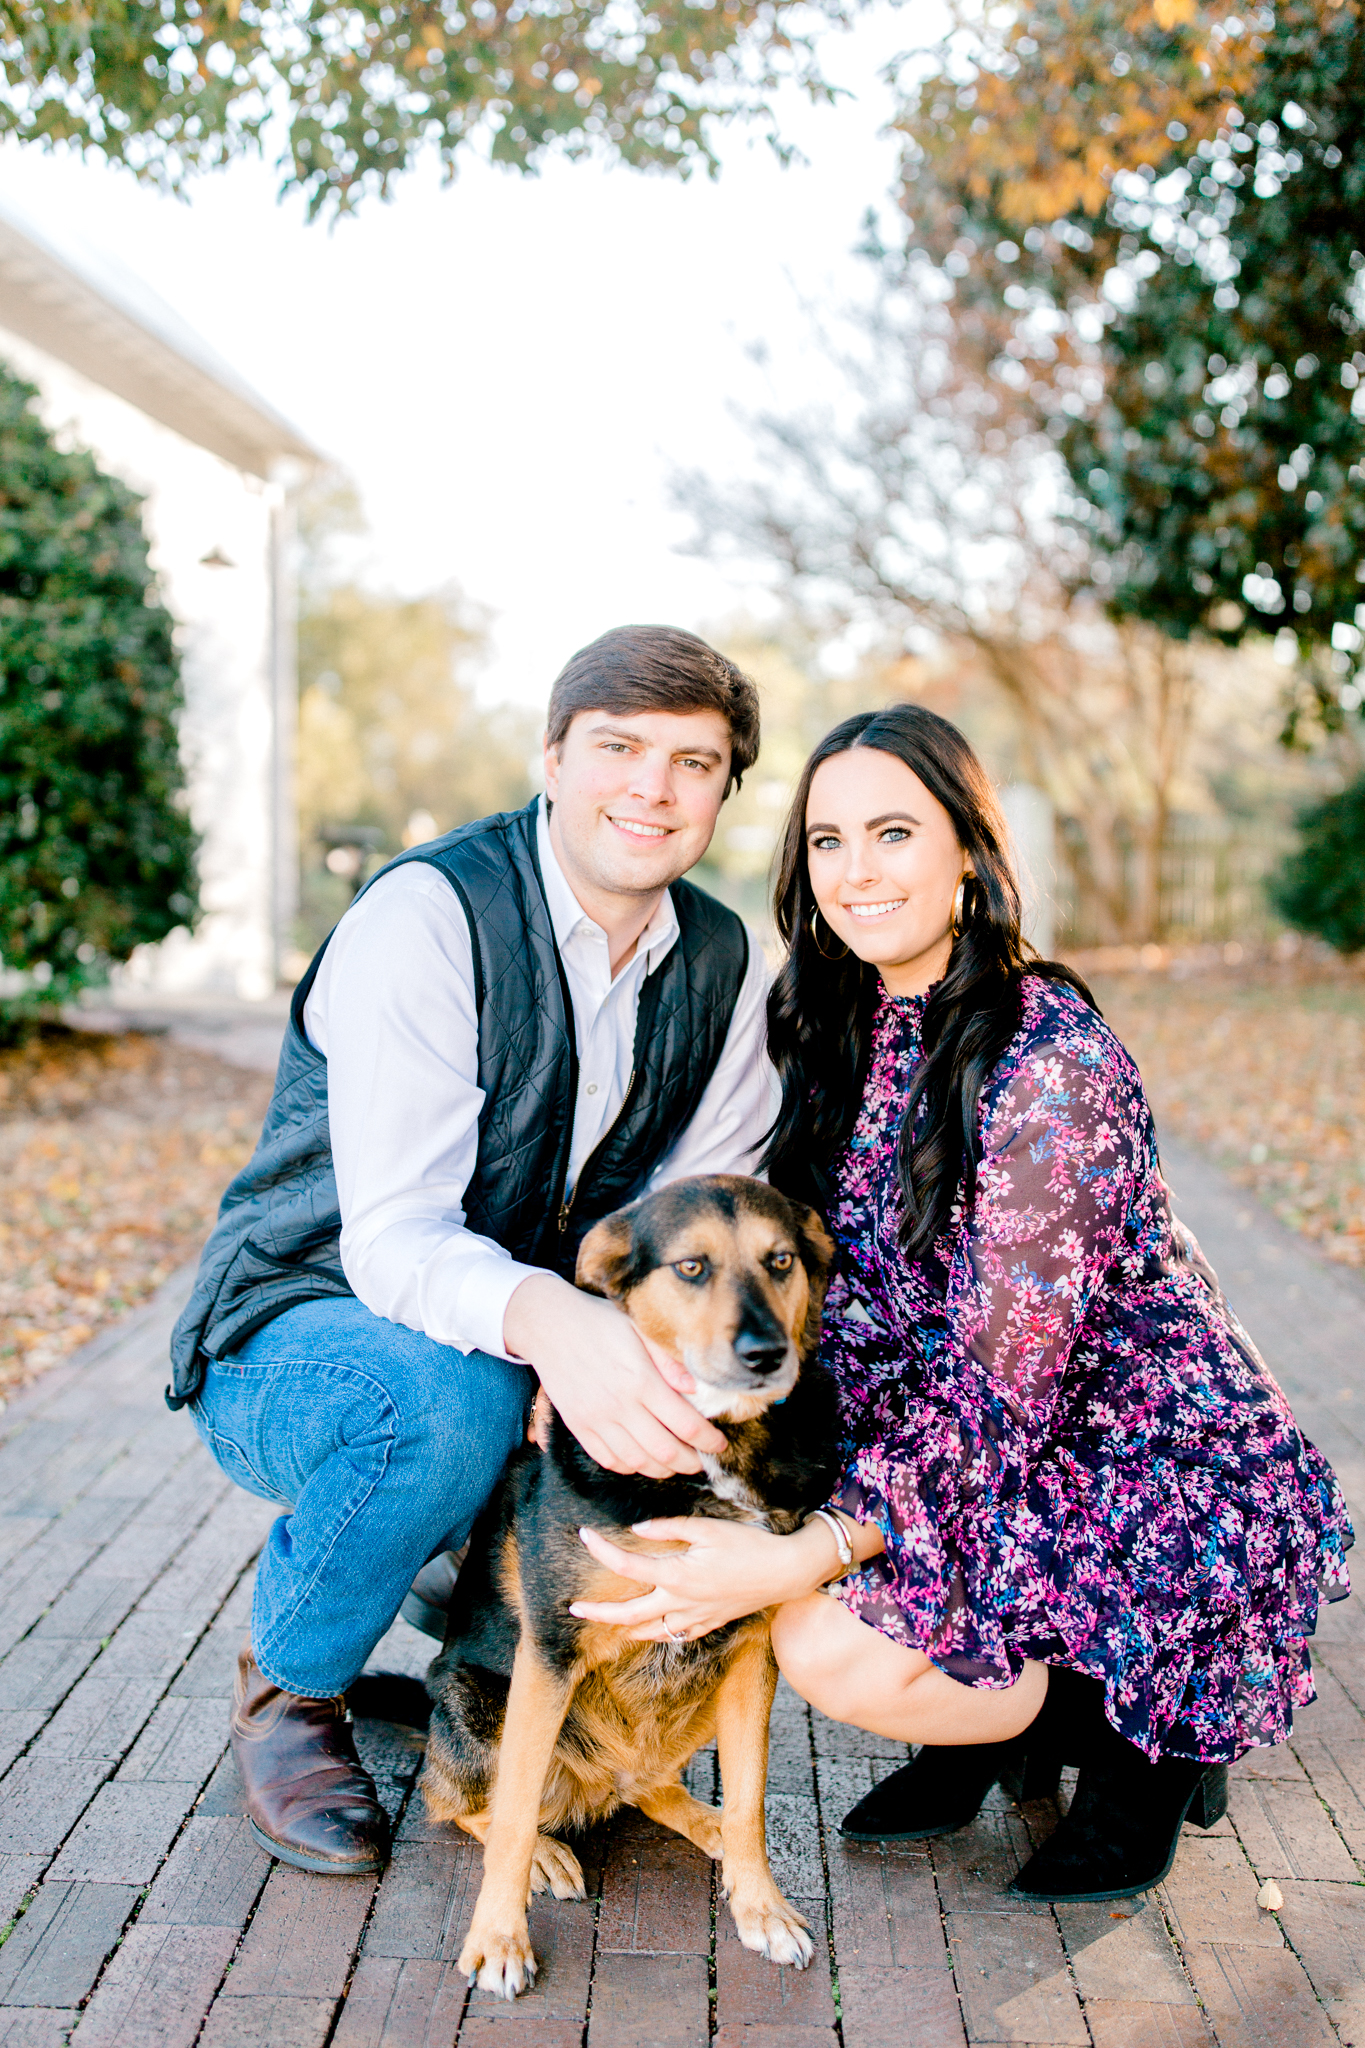 Meredith and Zach | Becca Rizzo Photography